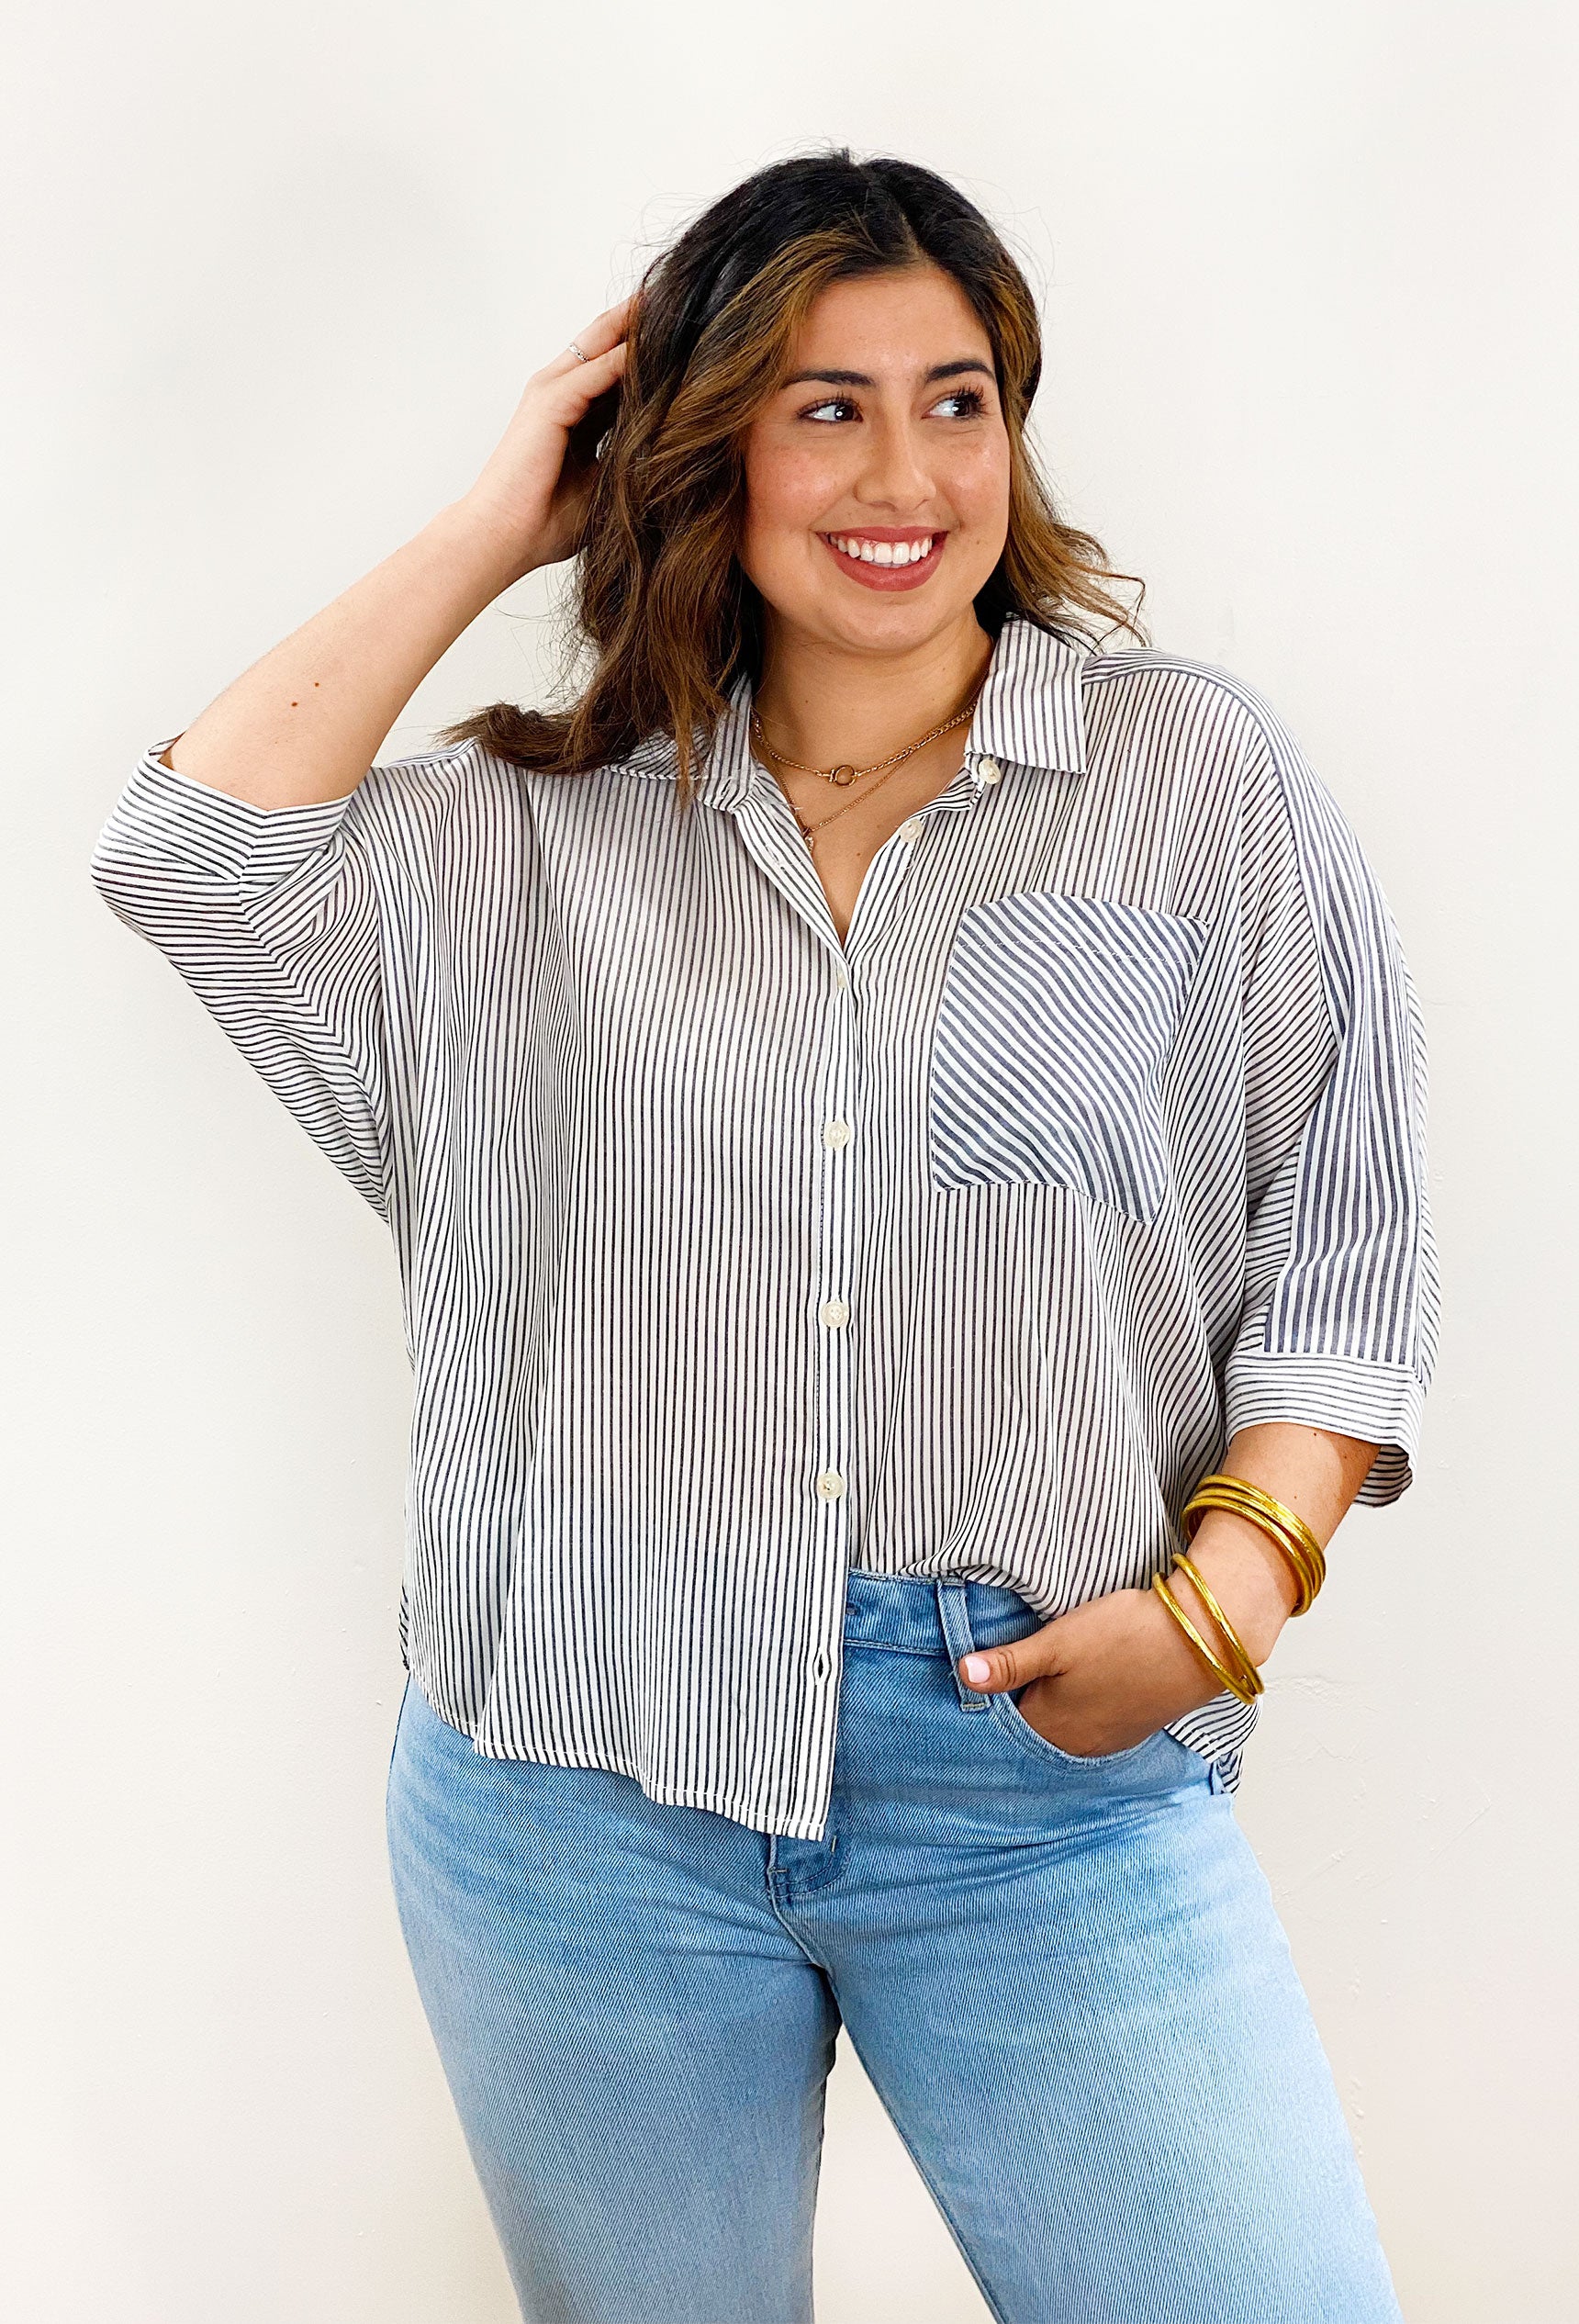 Without Regrets Striped Button Up Top, striped button up top 